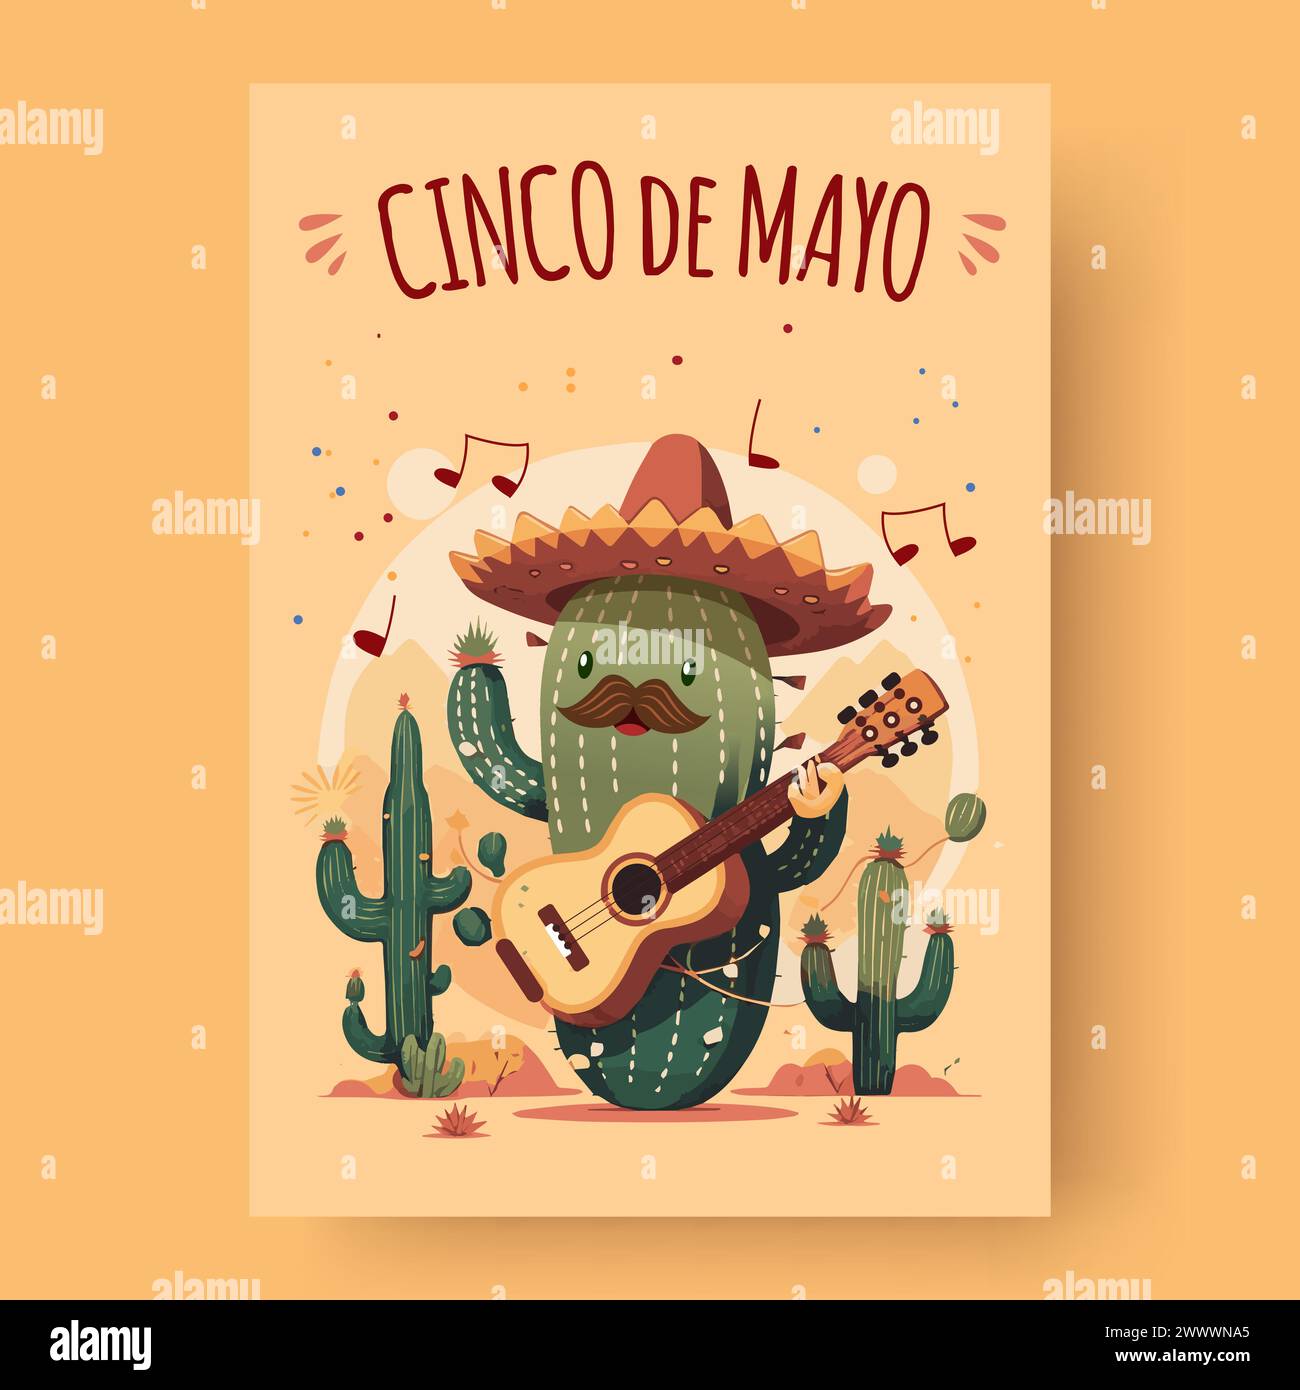 Cinco de Mayo Means 5 Mei, a festival in Mexico. A Cactus Character Playing Guitar Wearing Sombrero Hat Vector Illustration Stock Vector